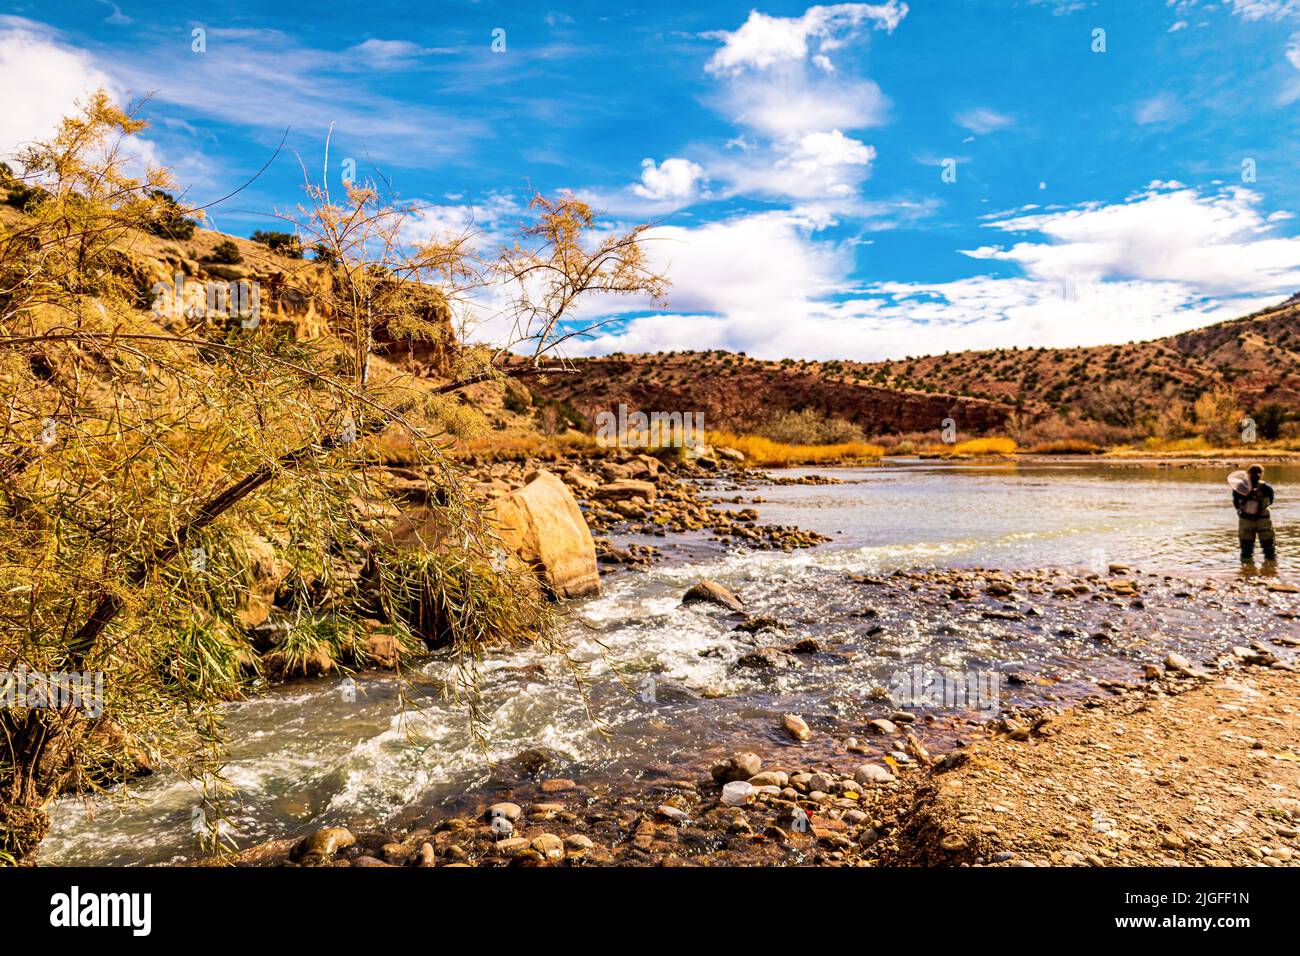 A man catches fly fishing in the Rio Chama River, New Mexico on sunny day under blue cloudy sky Stock Photo